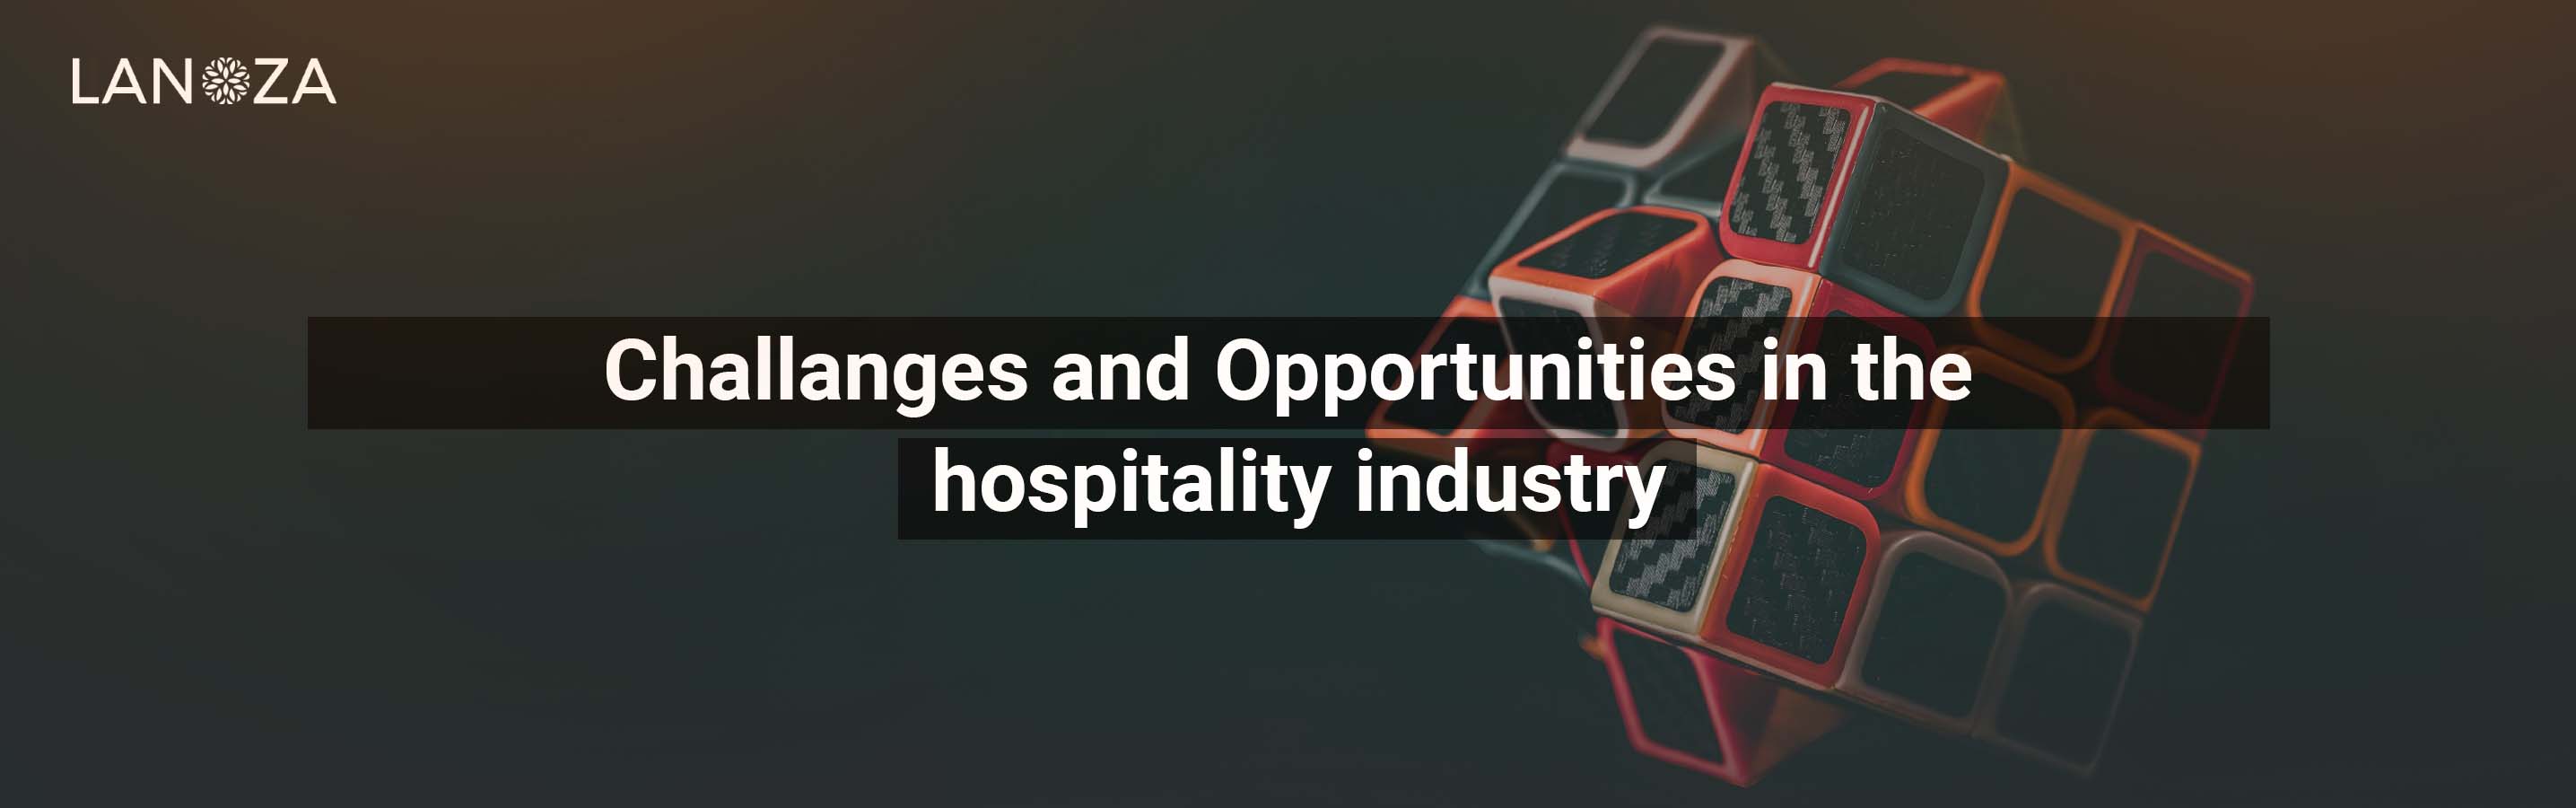 challenges-and-opportunities-in-the-hospitality-industry